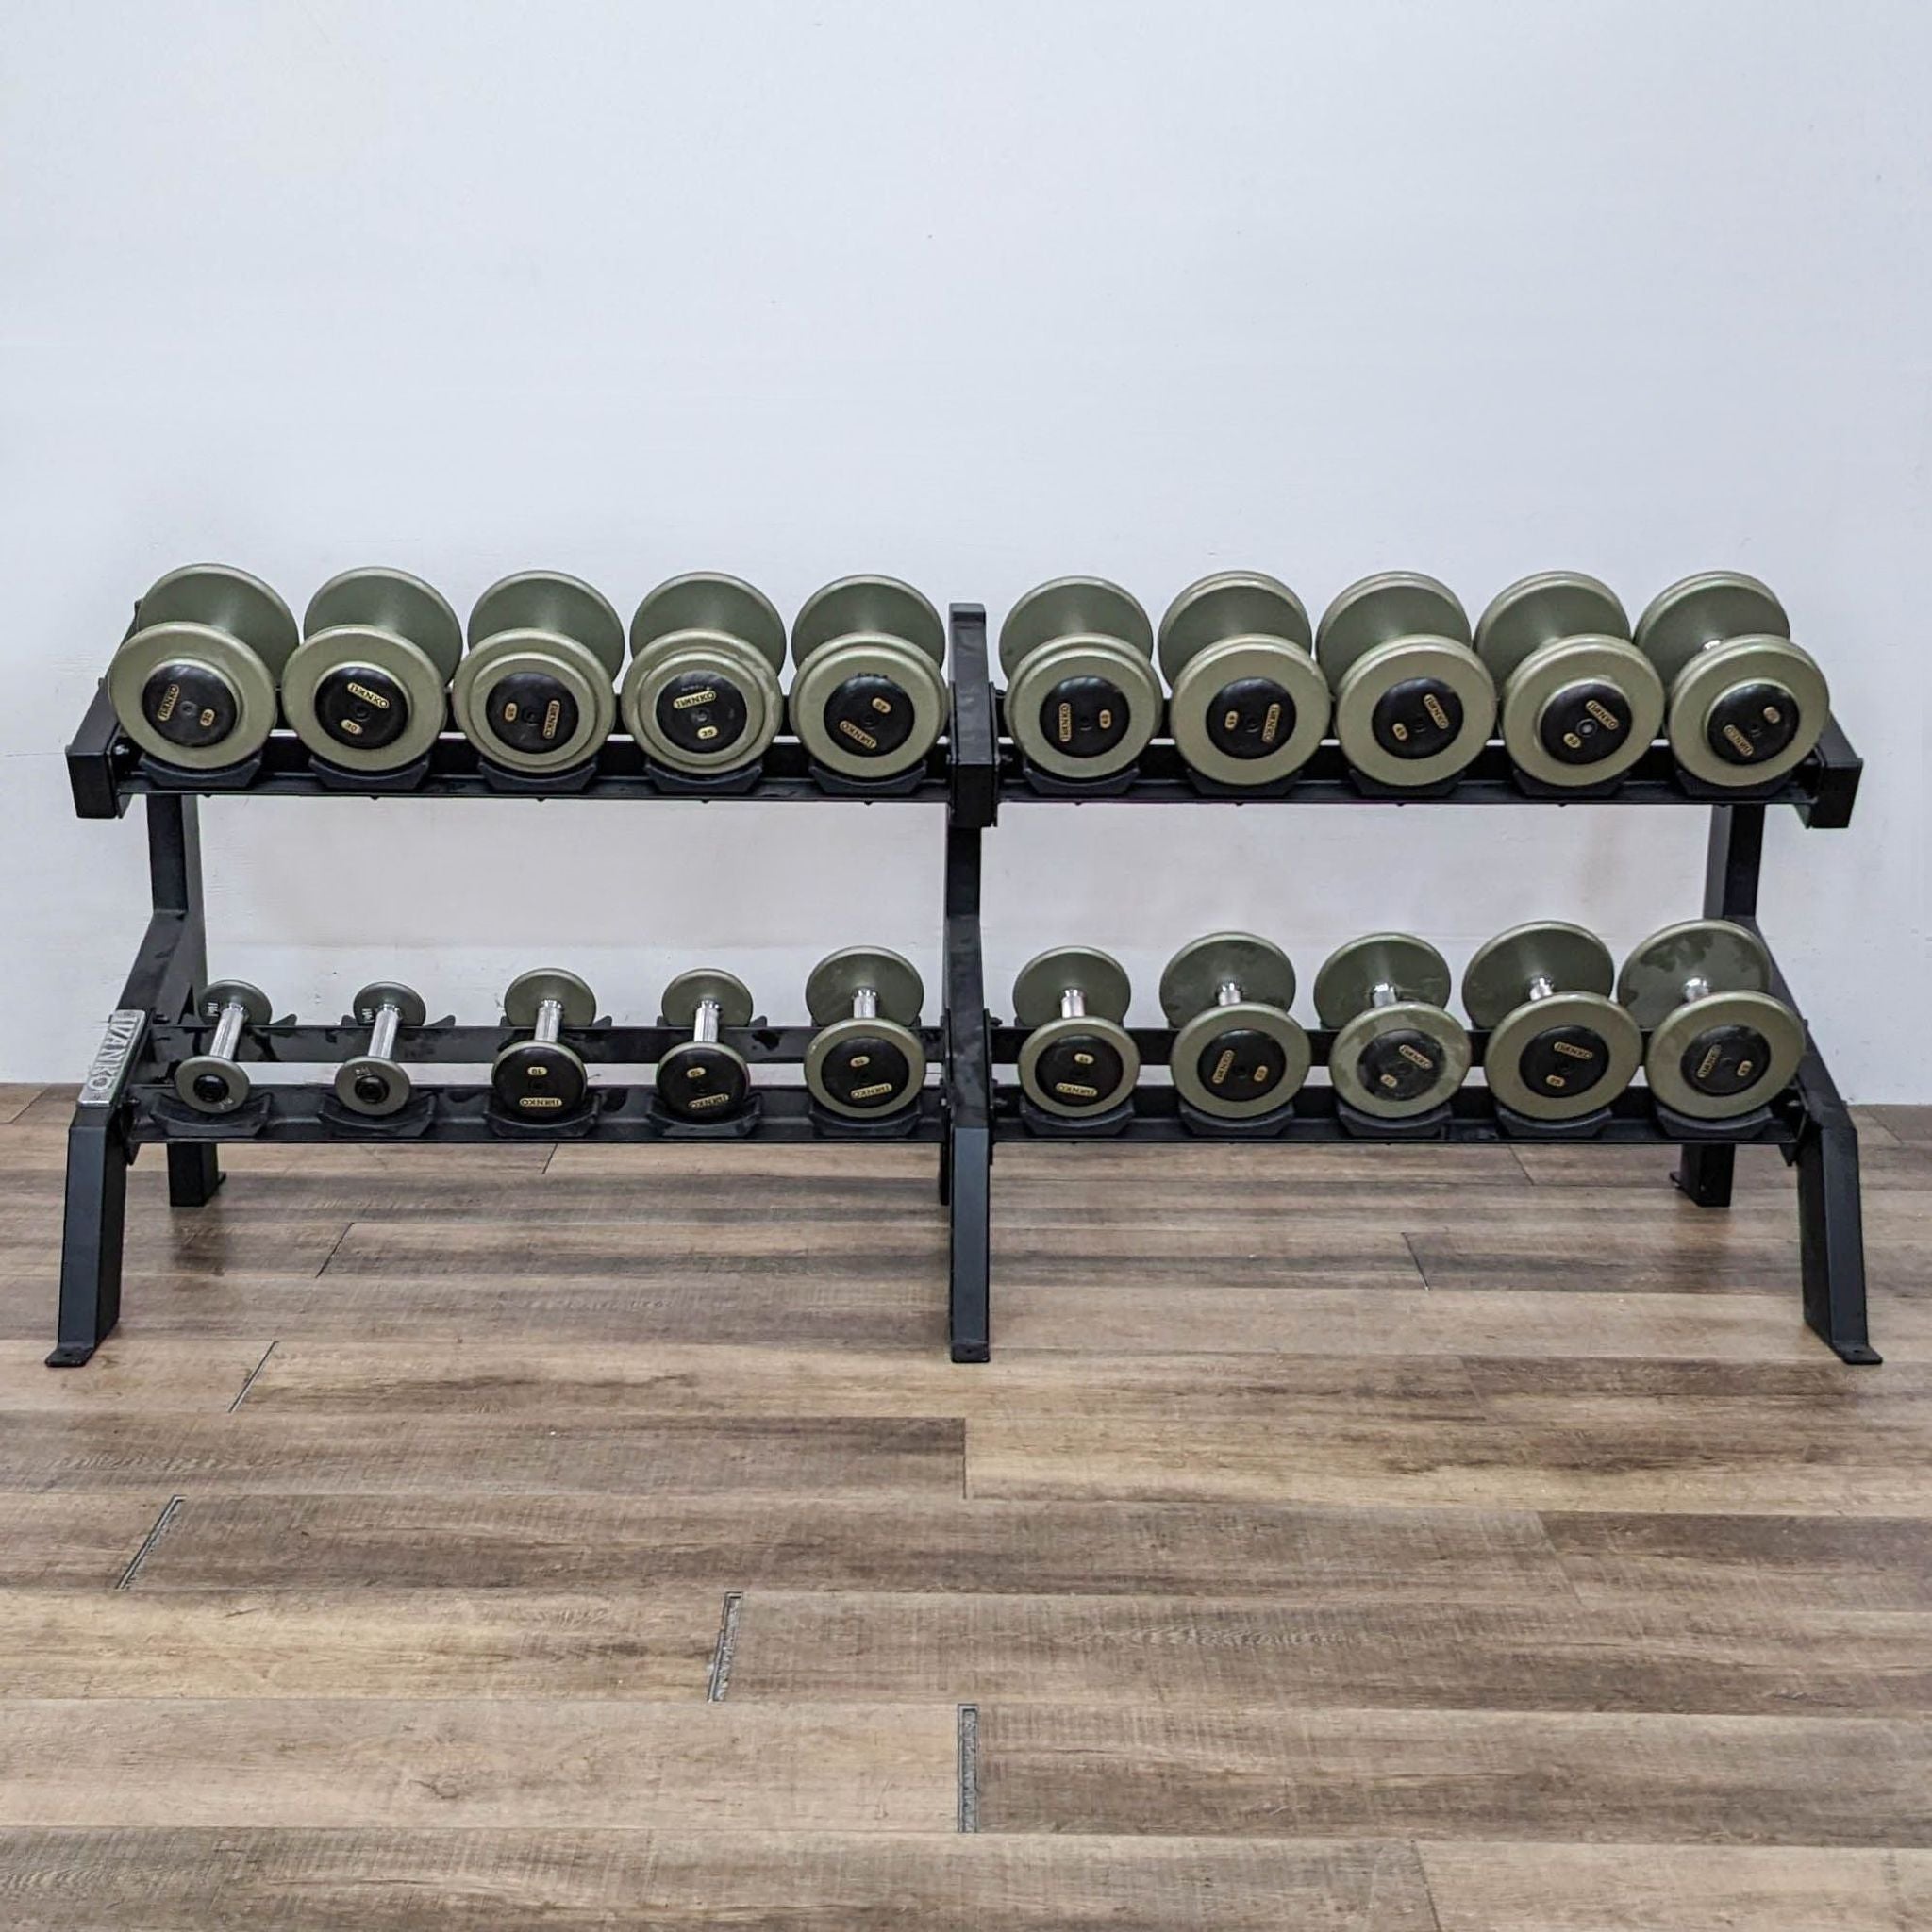 Ivanko branded dumbbells on a black rack against a white wall in a gym.